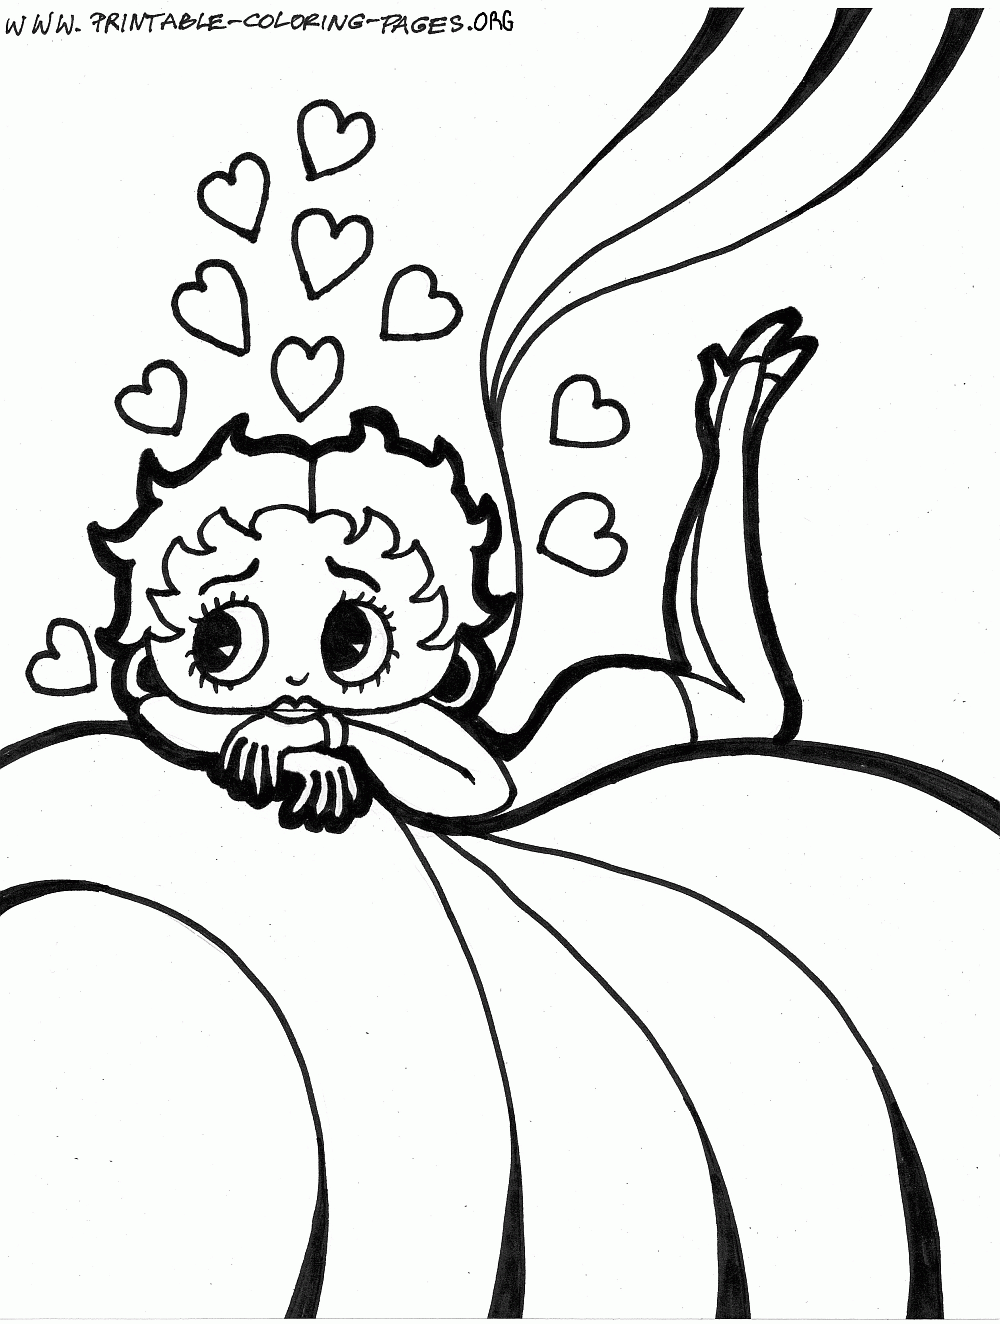 Betty Boop Coloring Pages To Print - Coloring Pages For All Ages